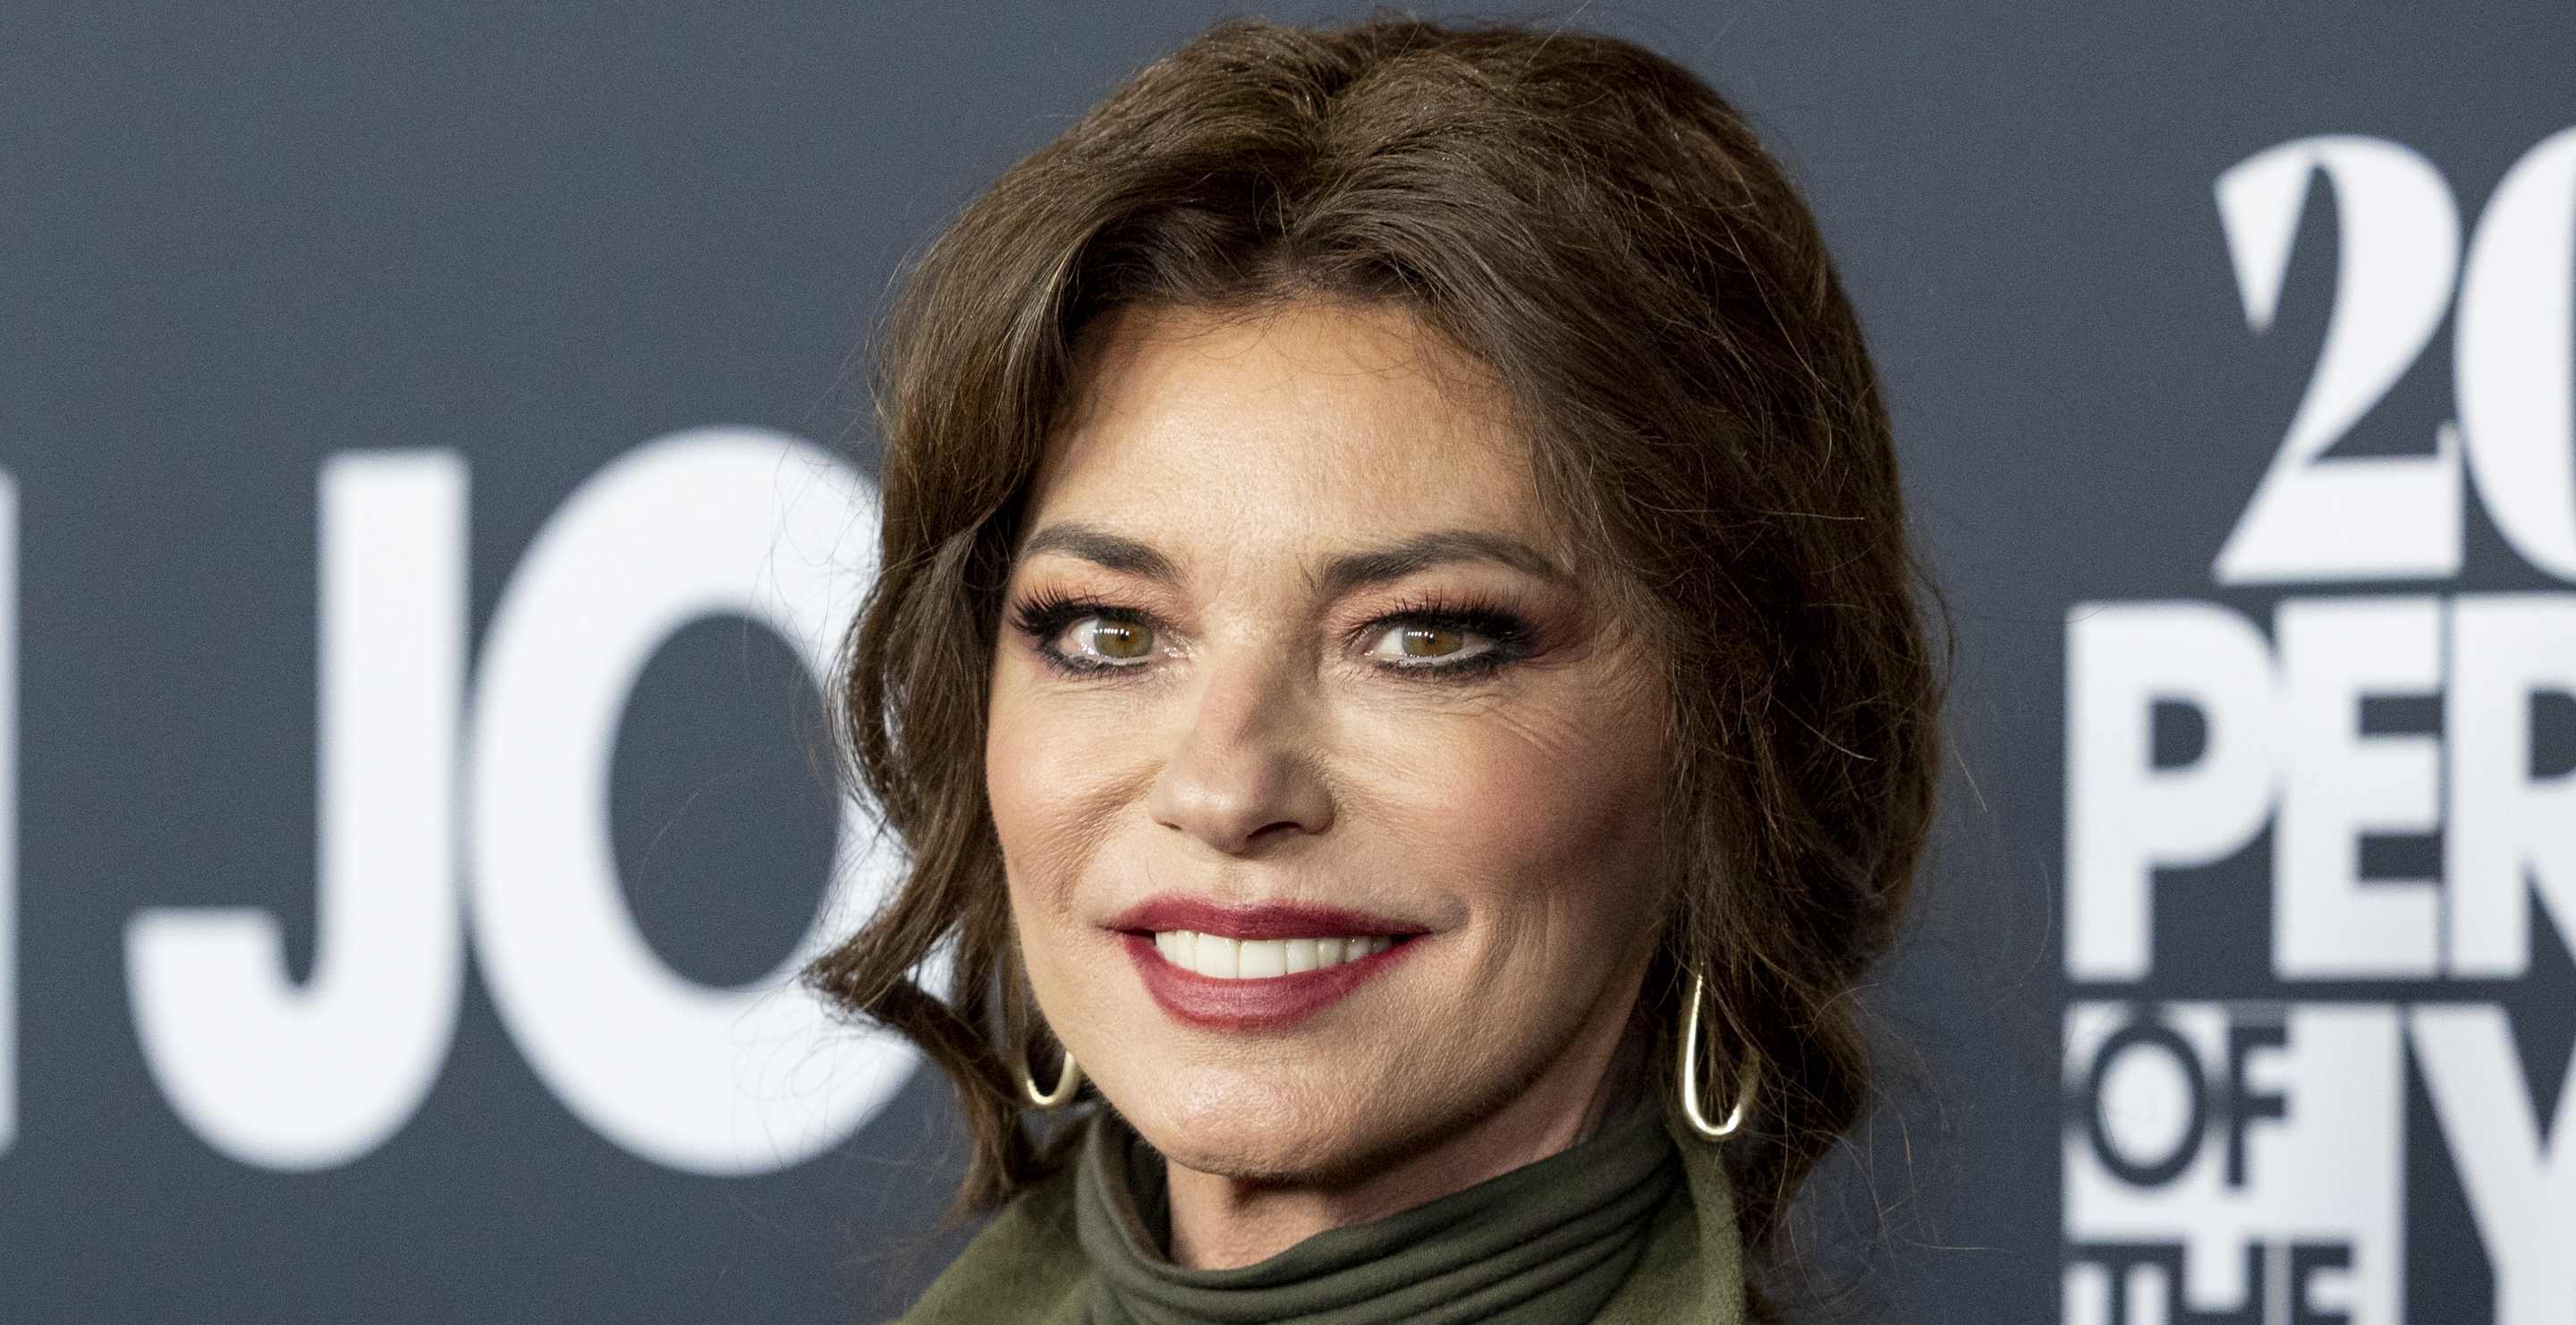 Shania Twain Embraces Hysterical Stage Mishap